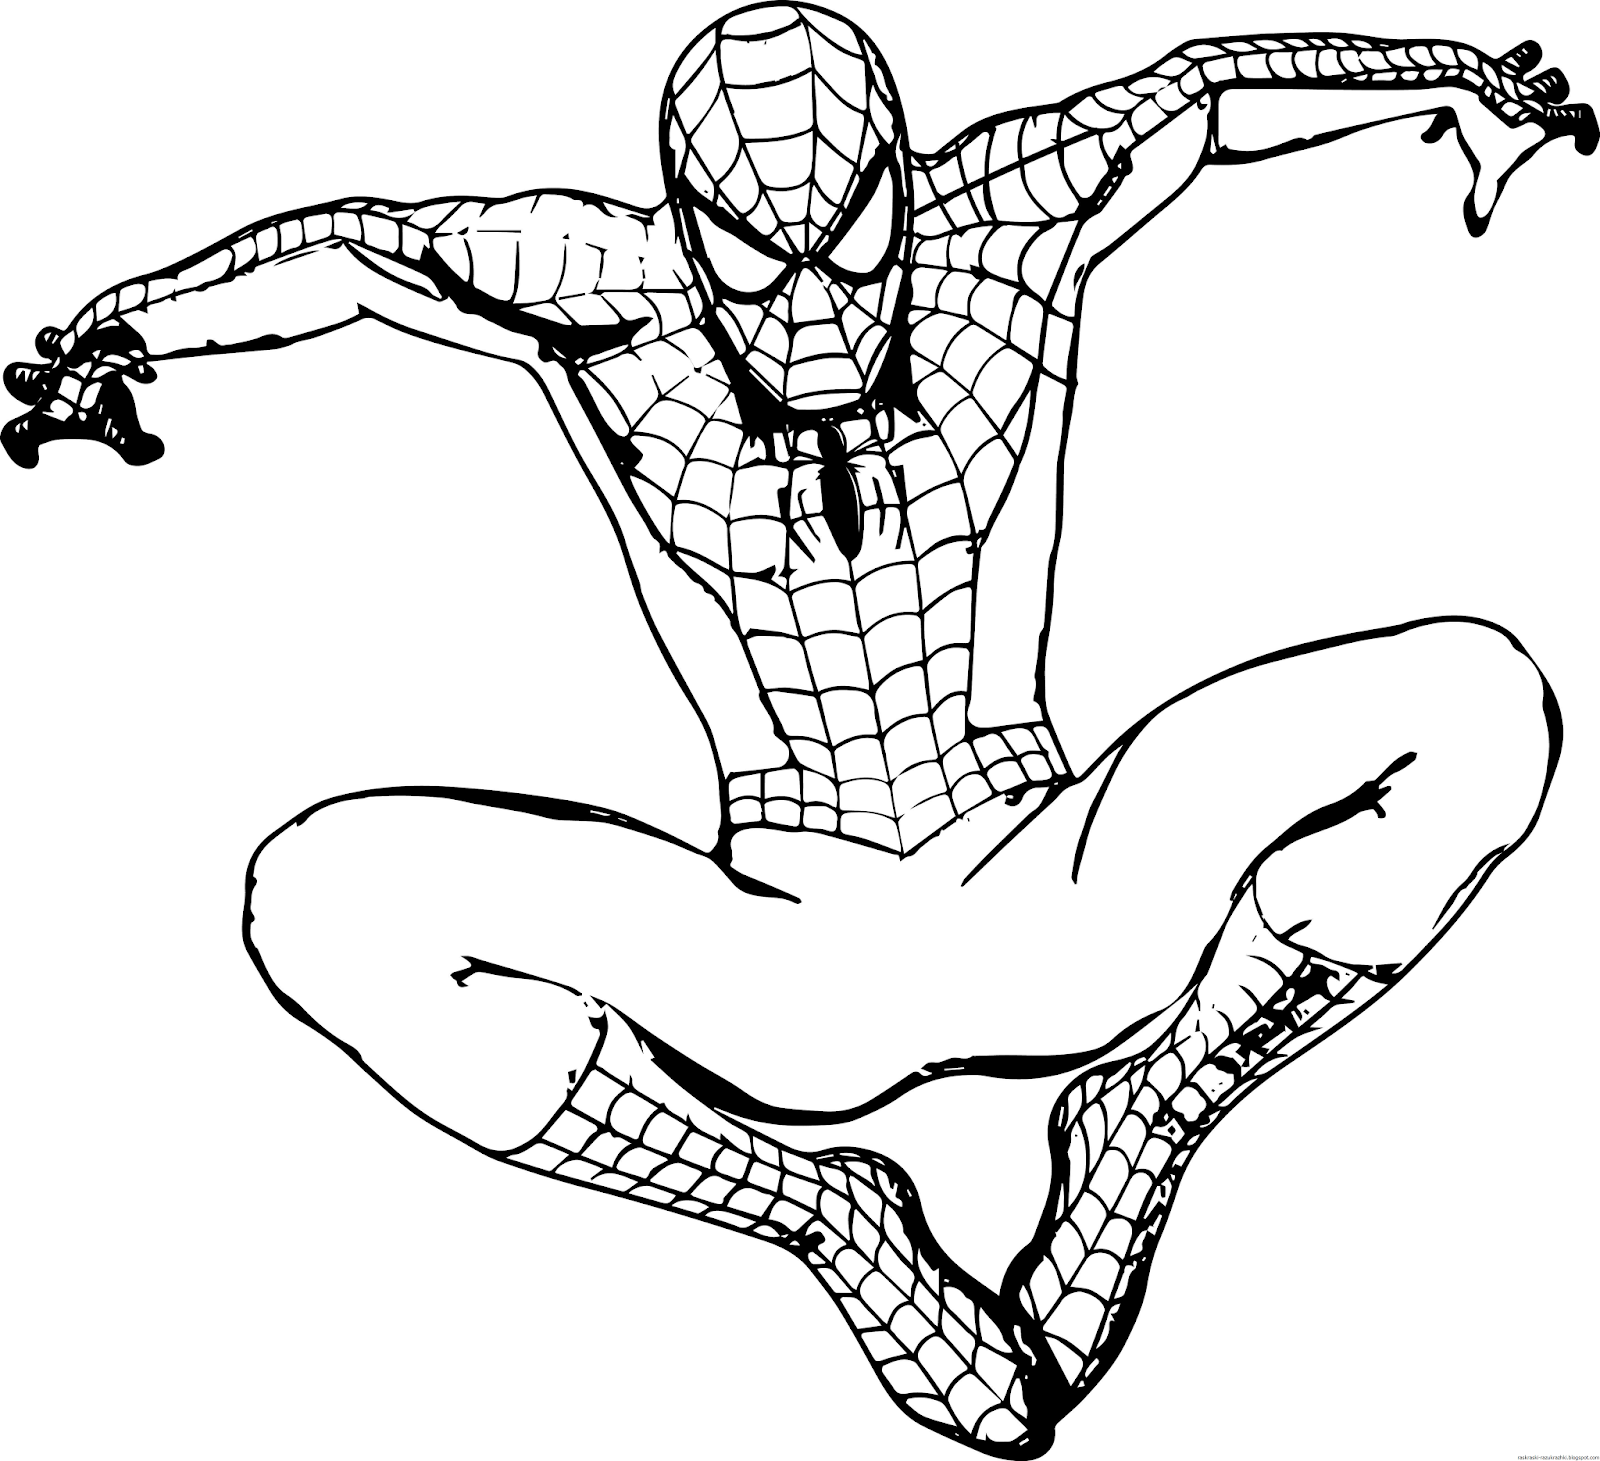 Spiderman's witty team coloring page